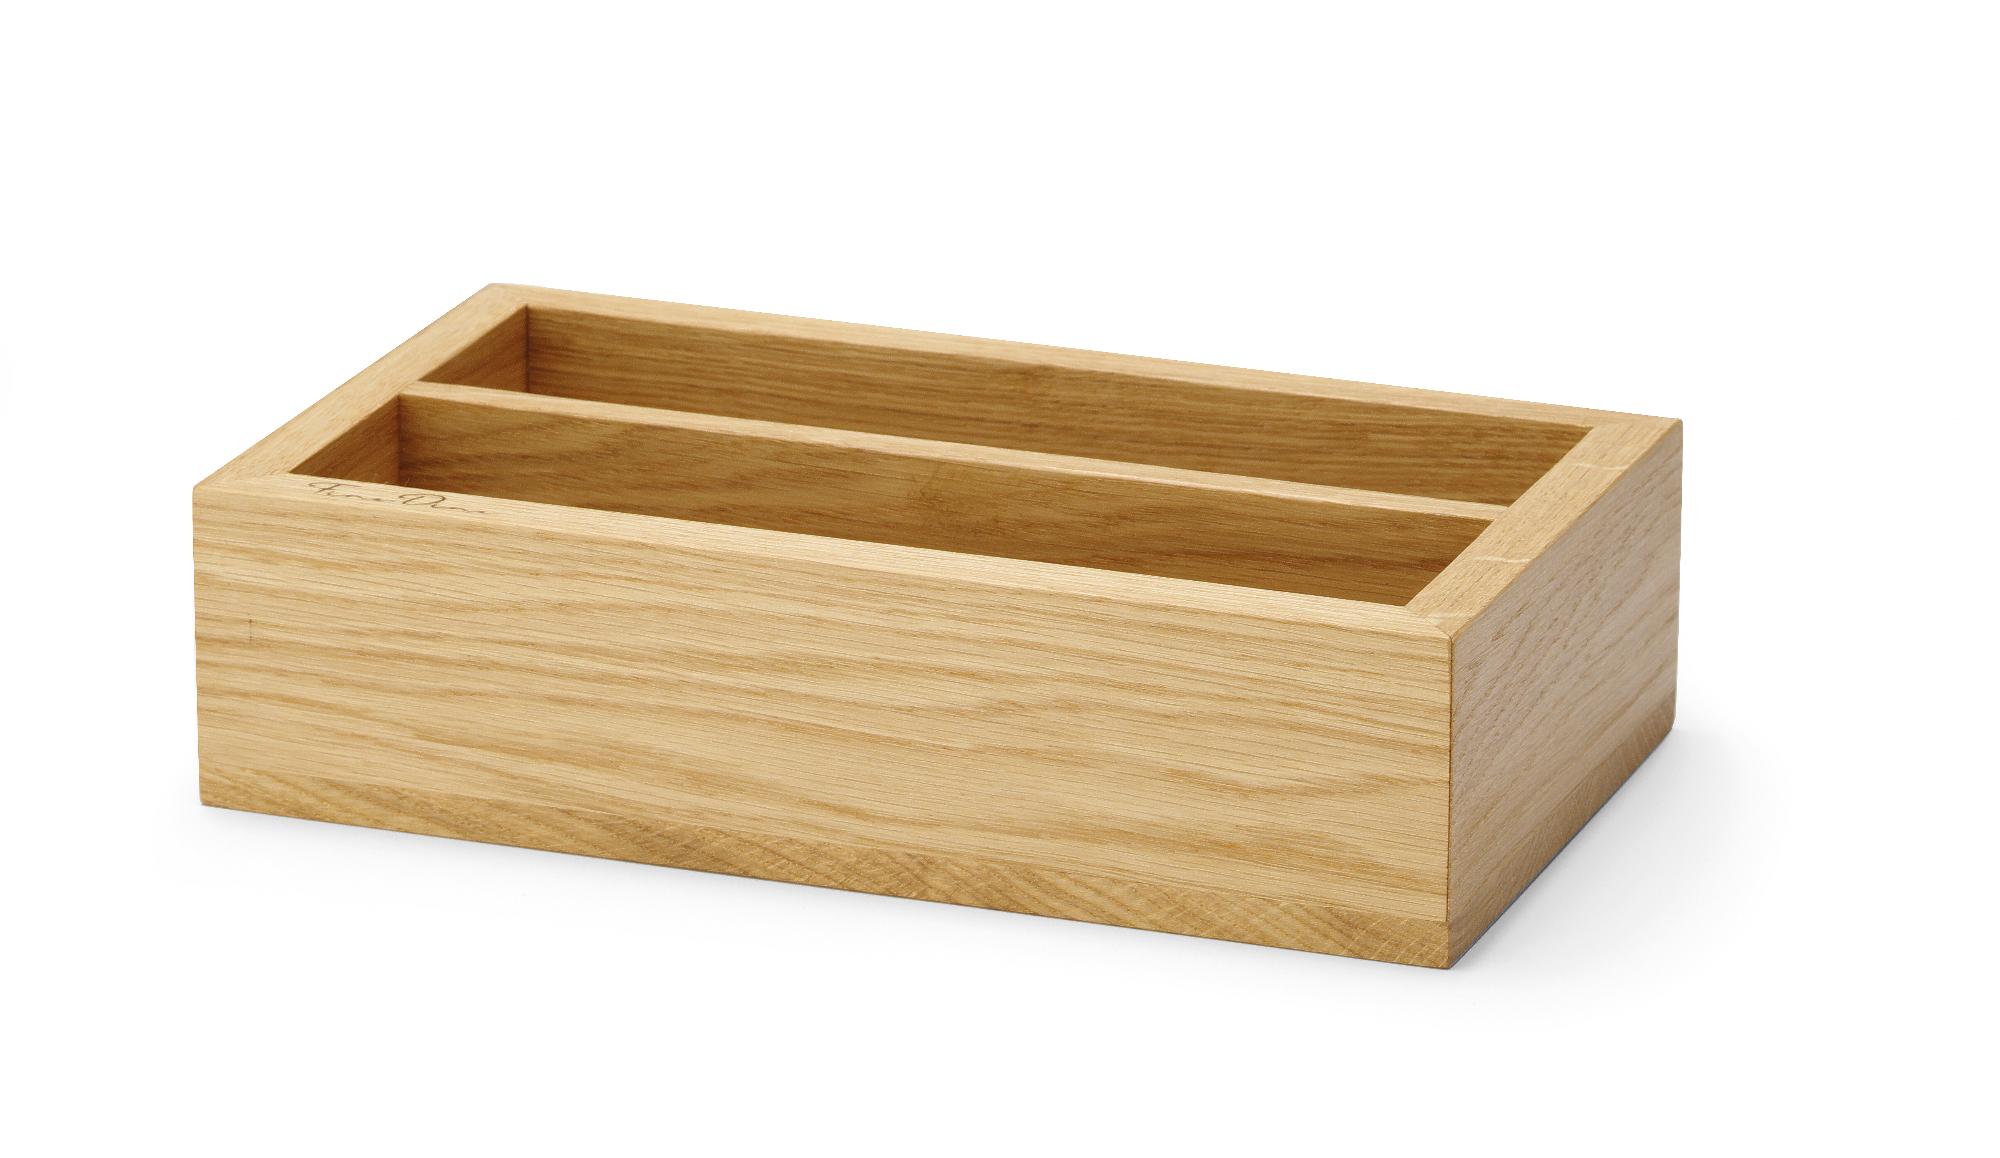 Madeira oak two-section cutlery box, 275x165x60mm